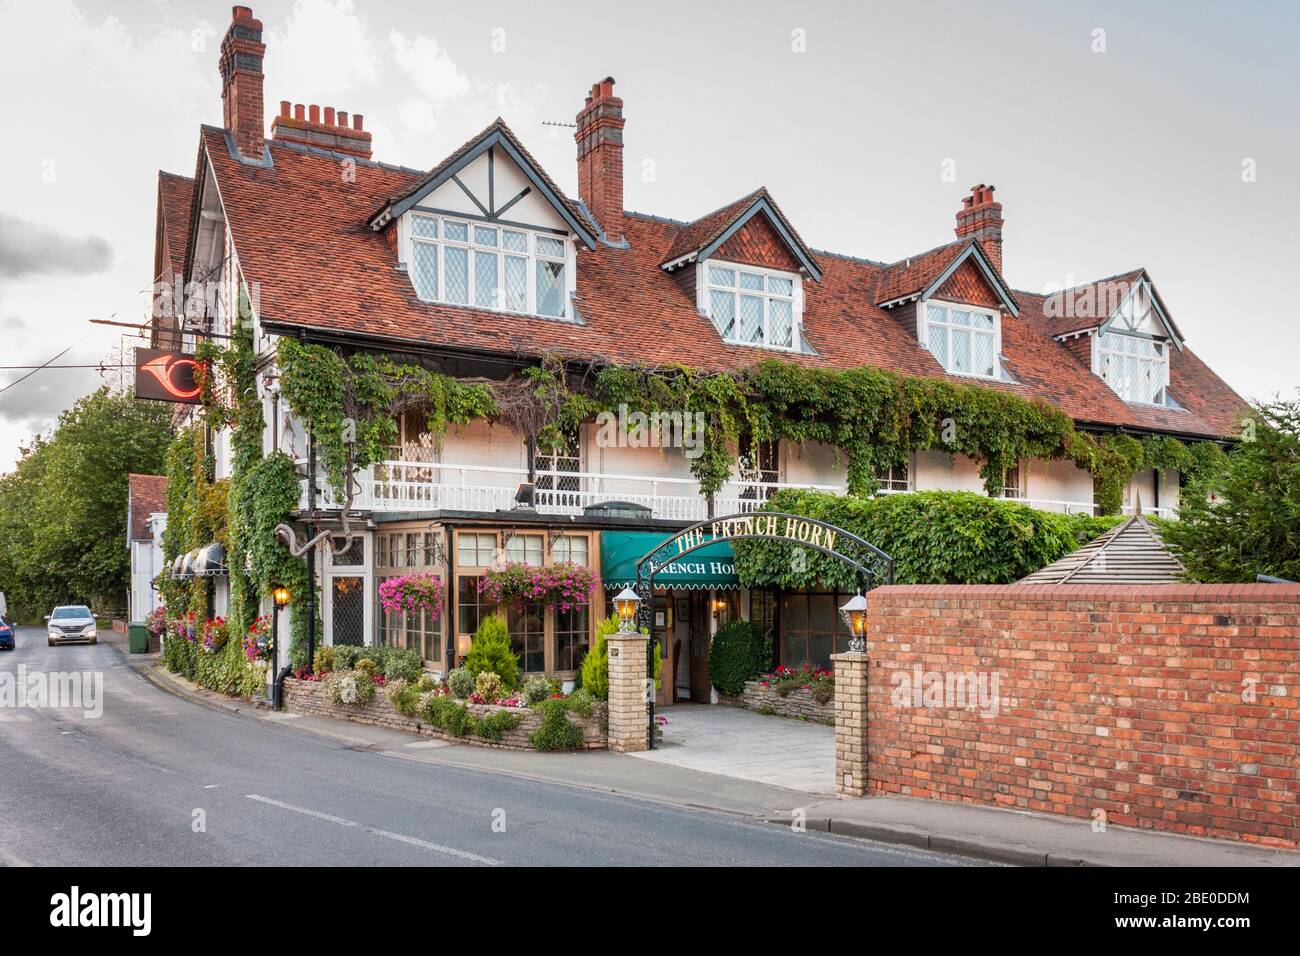 The French Horn Pub in Sonning-on-Thames, Berkshire, England, GB, Großbritannien. Stockfoto